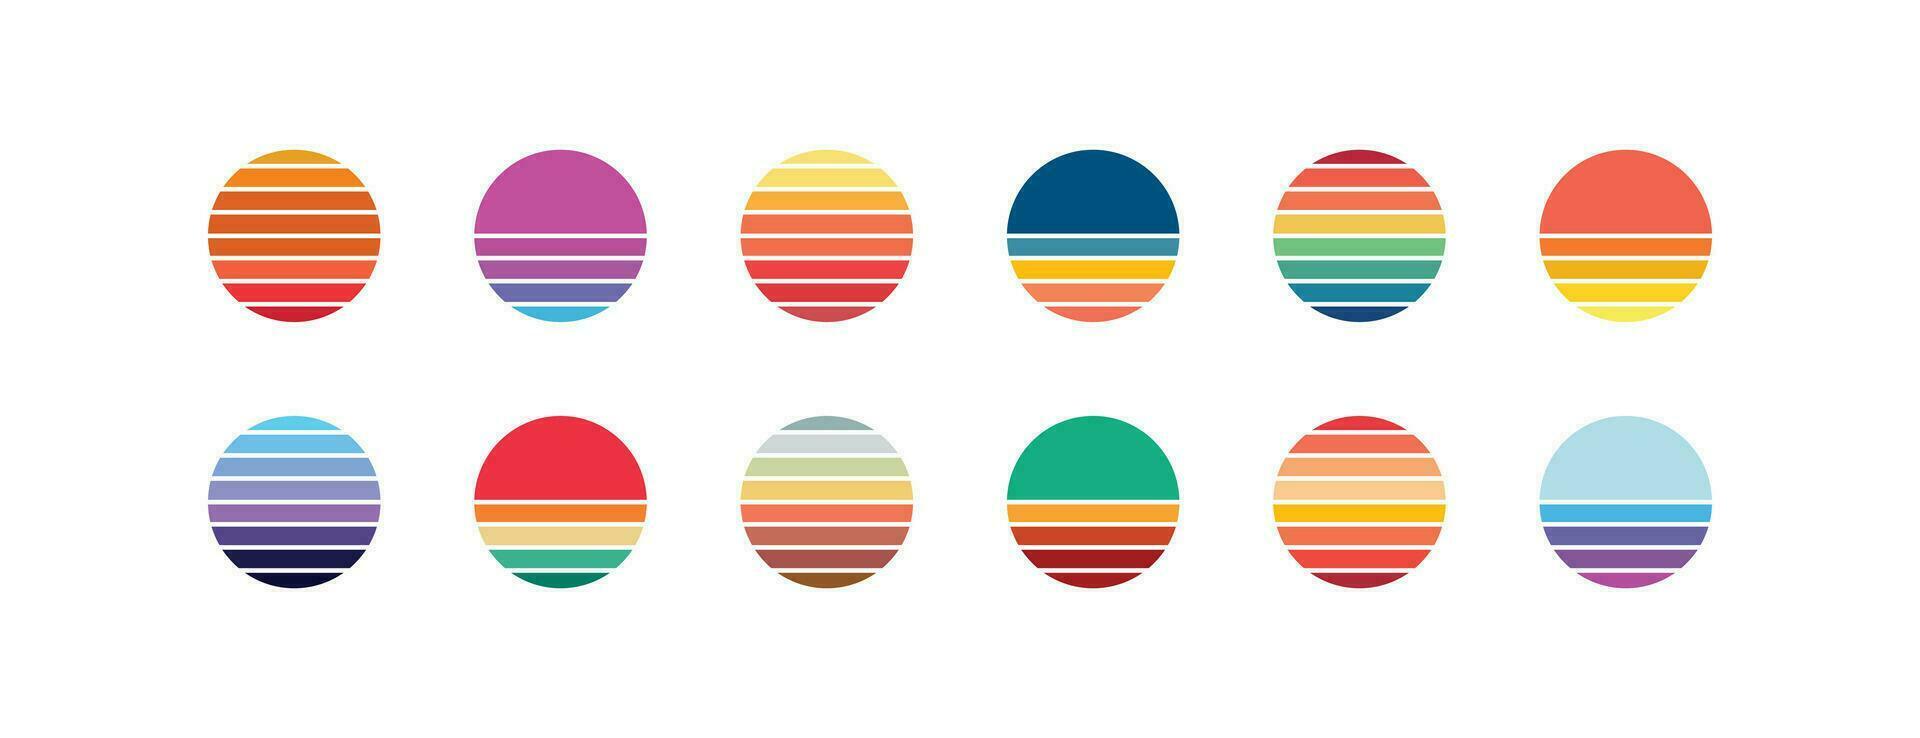 Sun retro badge icon set. Abstract ocean view background inside circles shapes illustrations symbol. Sign summer vector